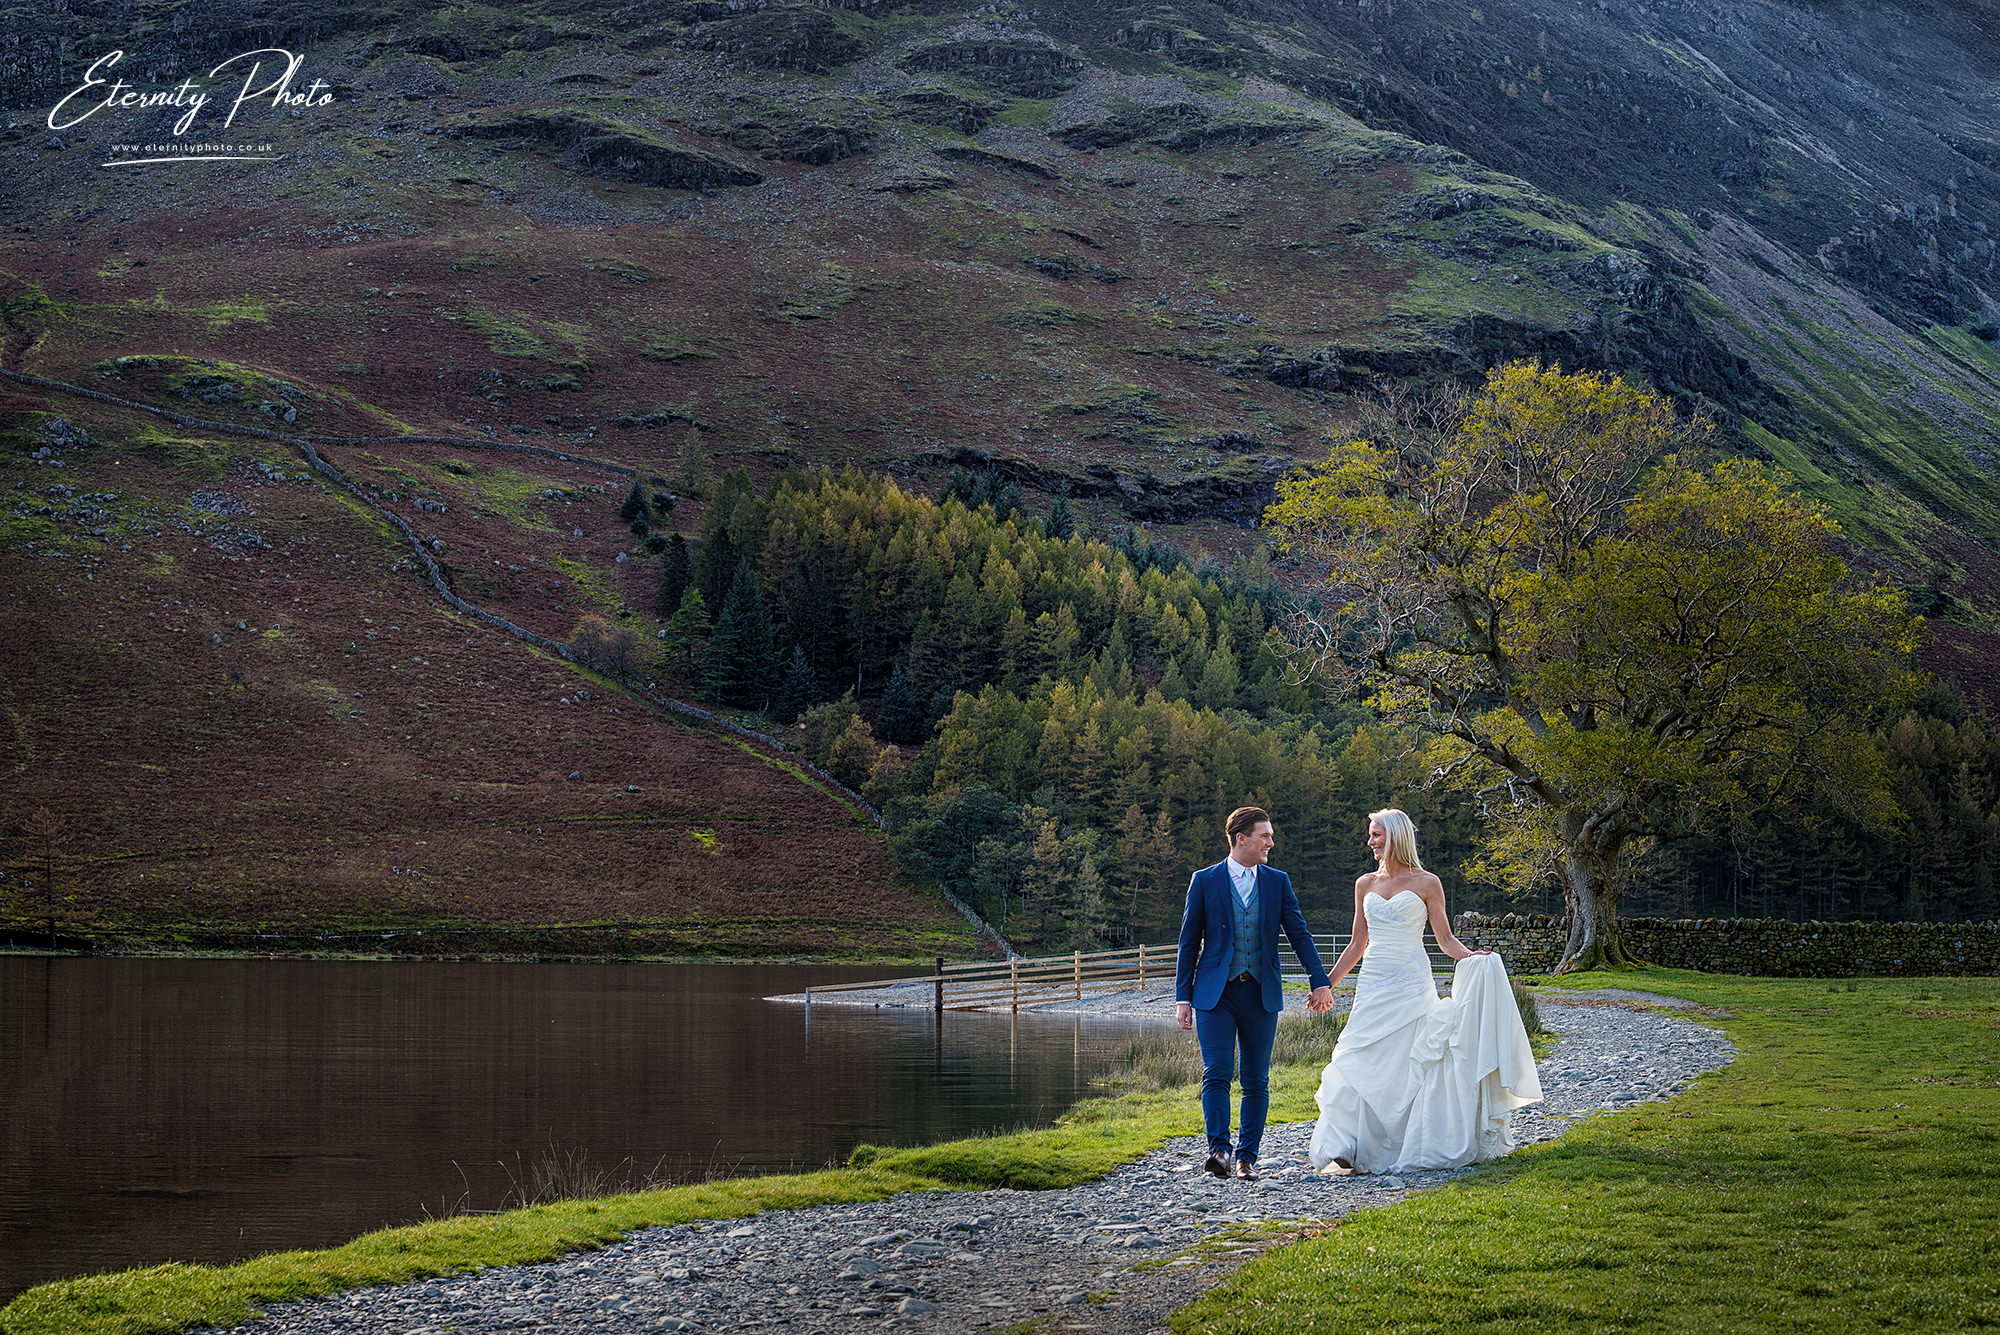 Wedding couple walking by scenic lake and mountains.